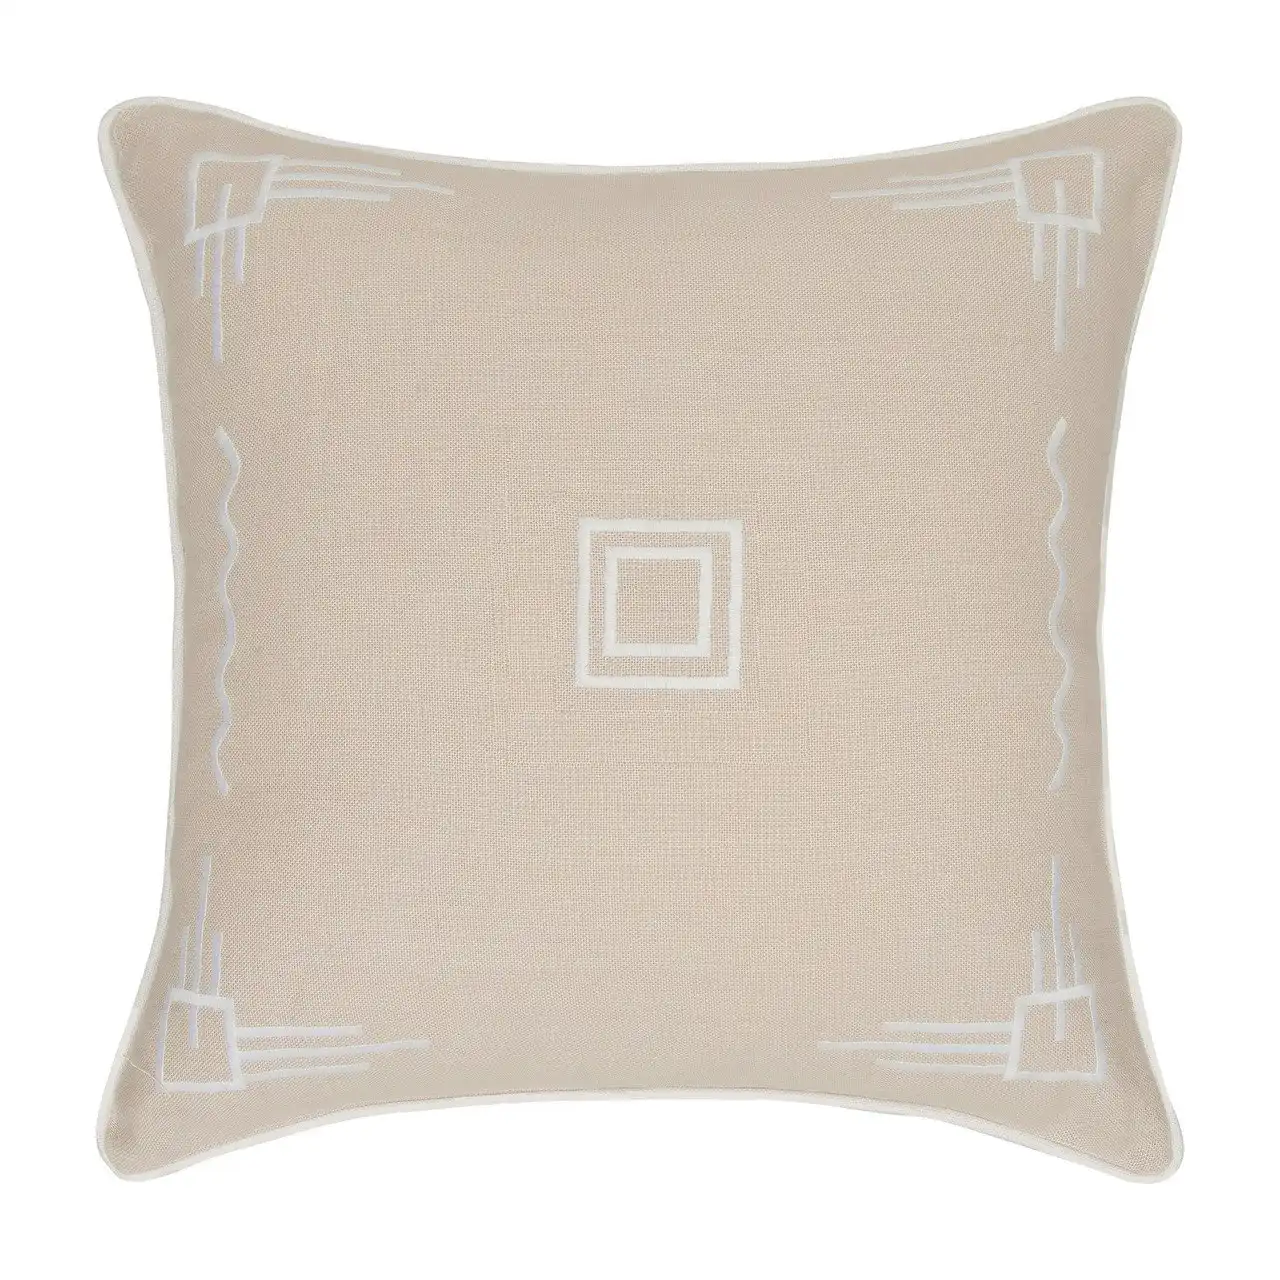 Textile Bazaar ** CLEARANCE** Our Supplier is Closing - Coco Chanel Embroidered Cushion